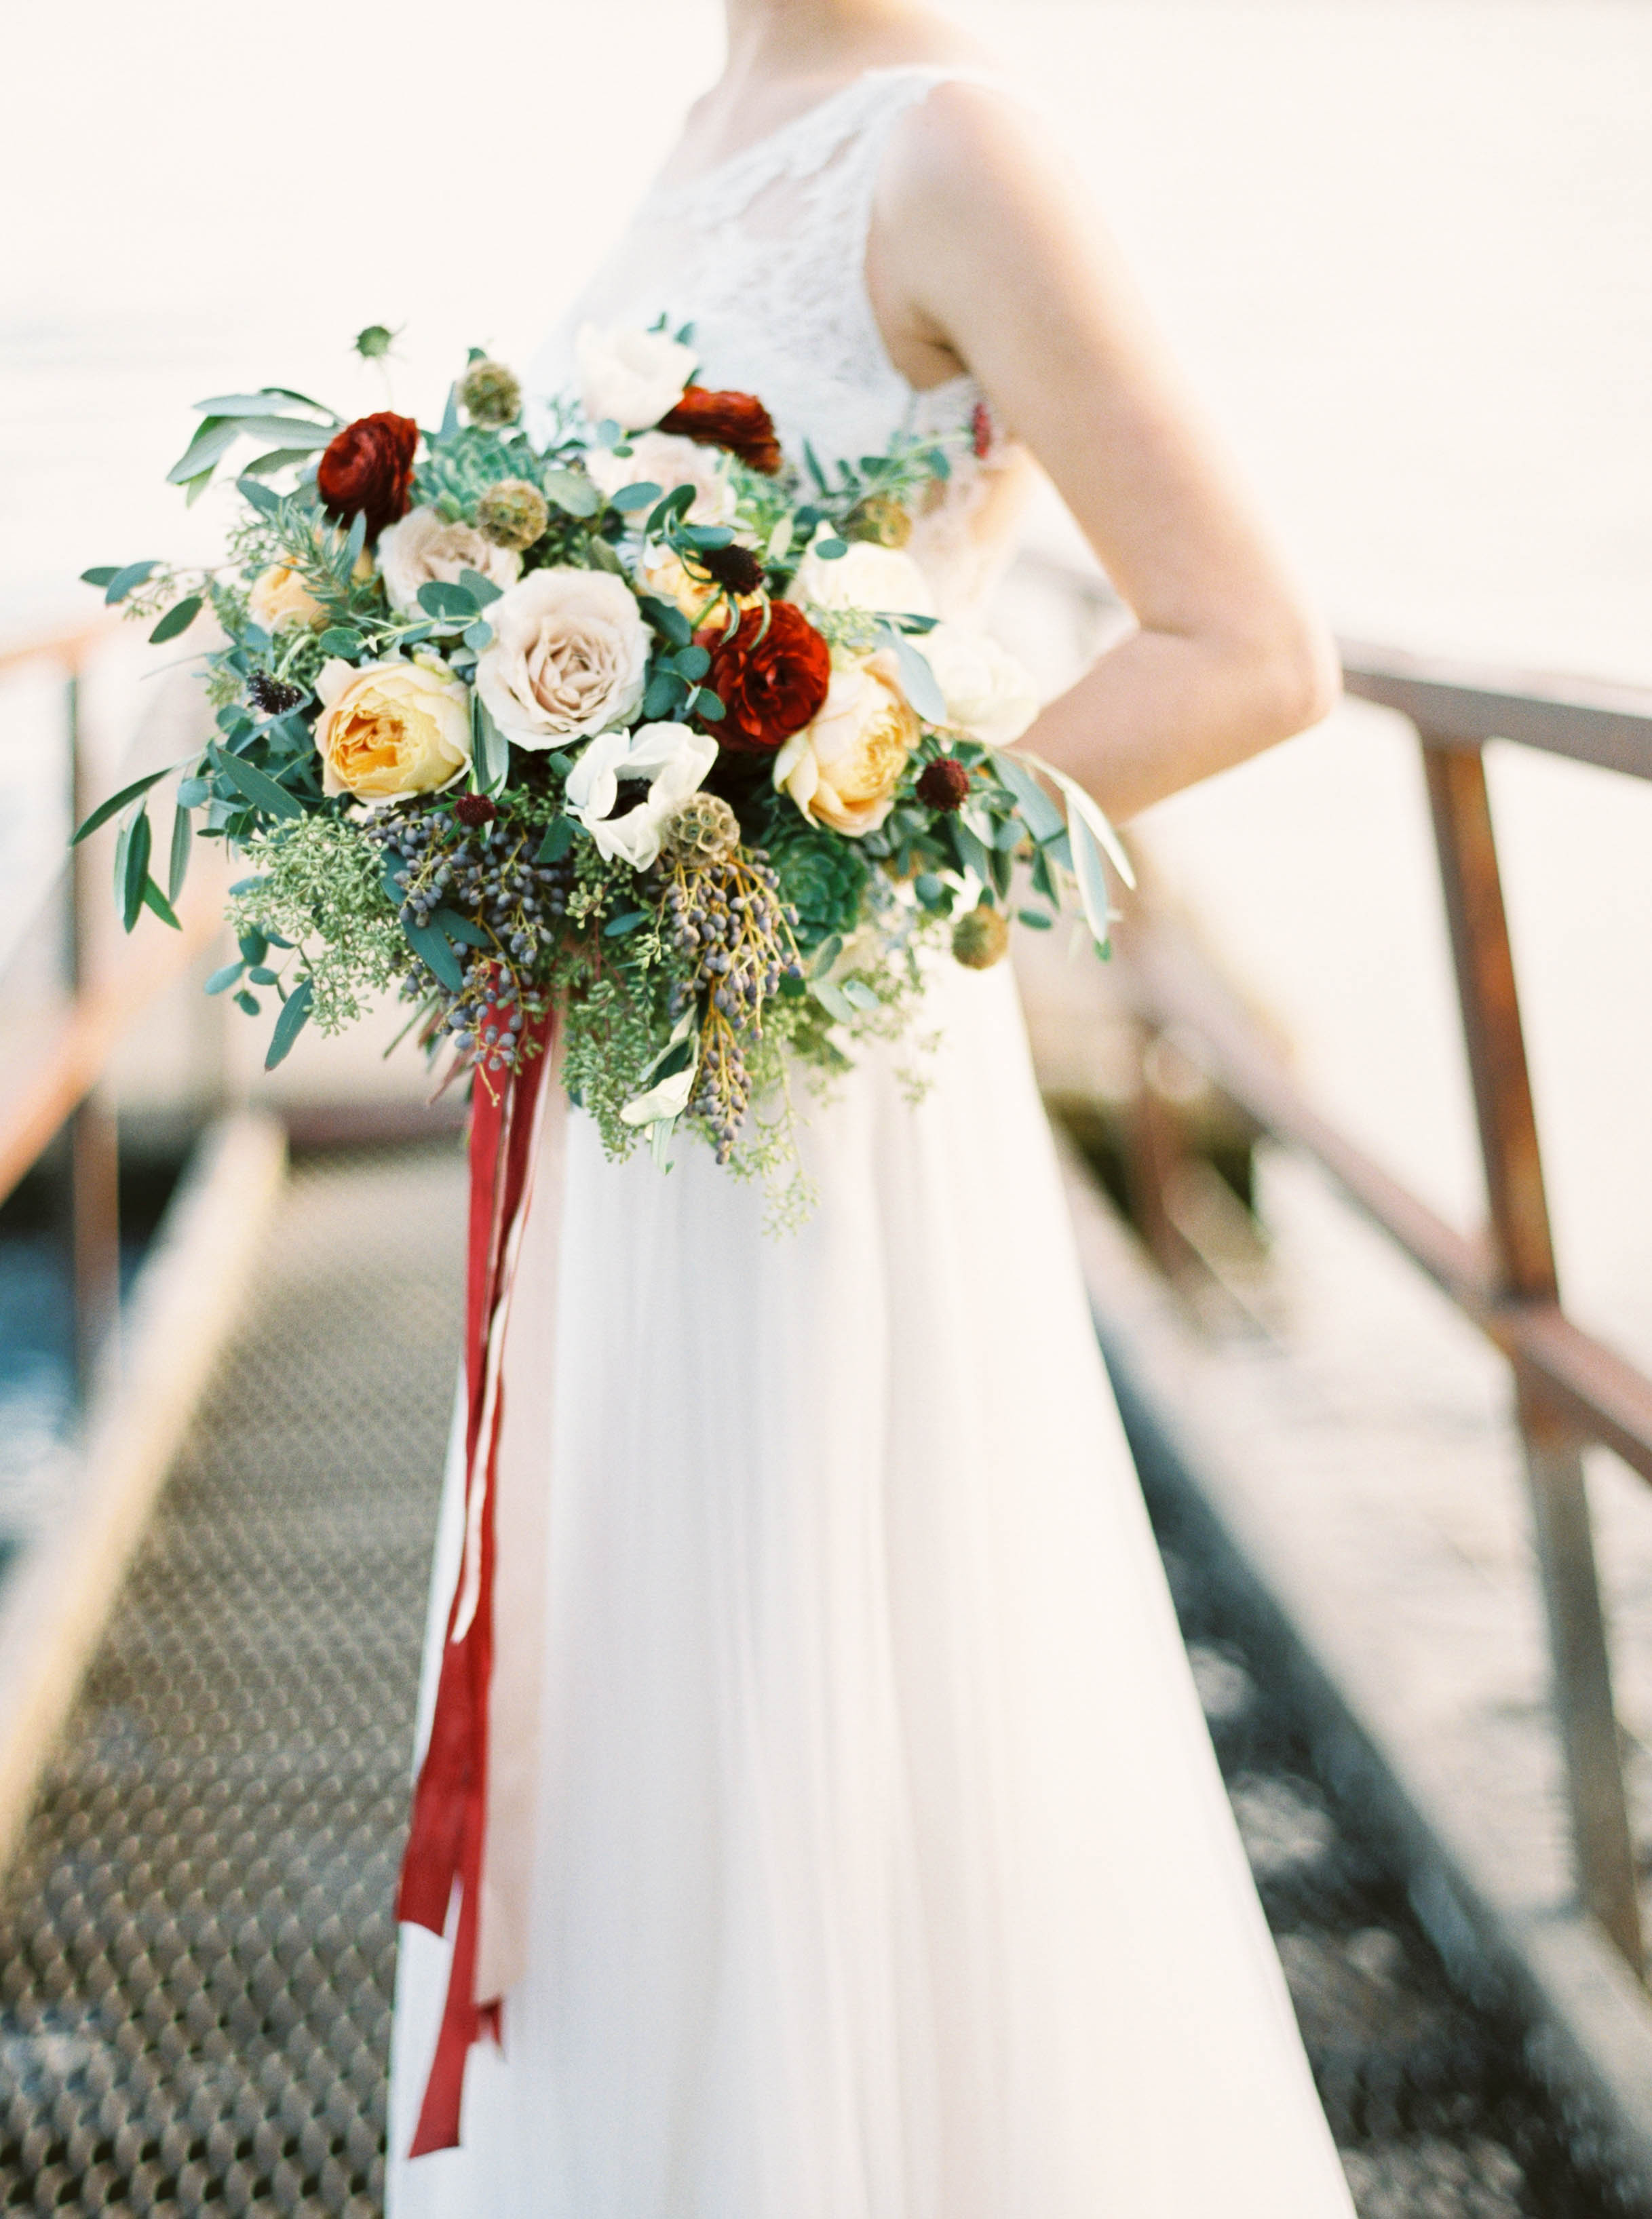 Loose, trailing bouquet with garden roses, ranunculus, and olive branches // Destination Floral Design